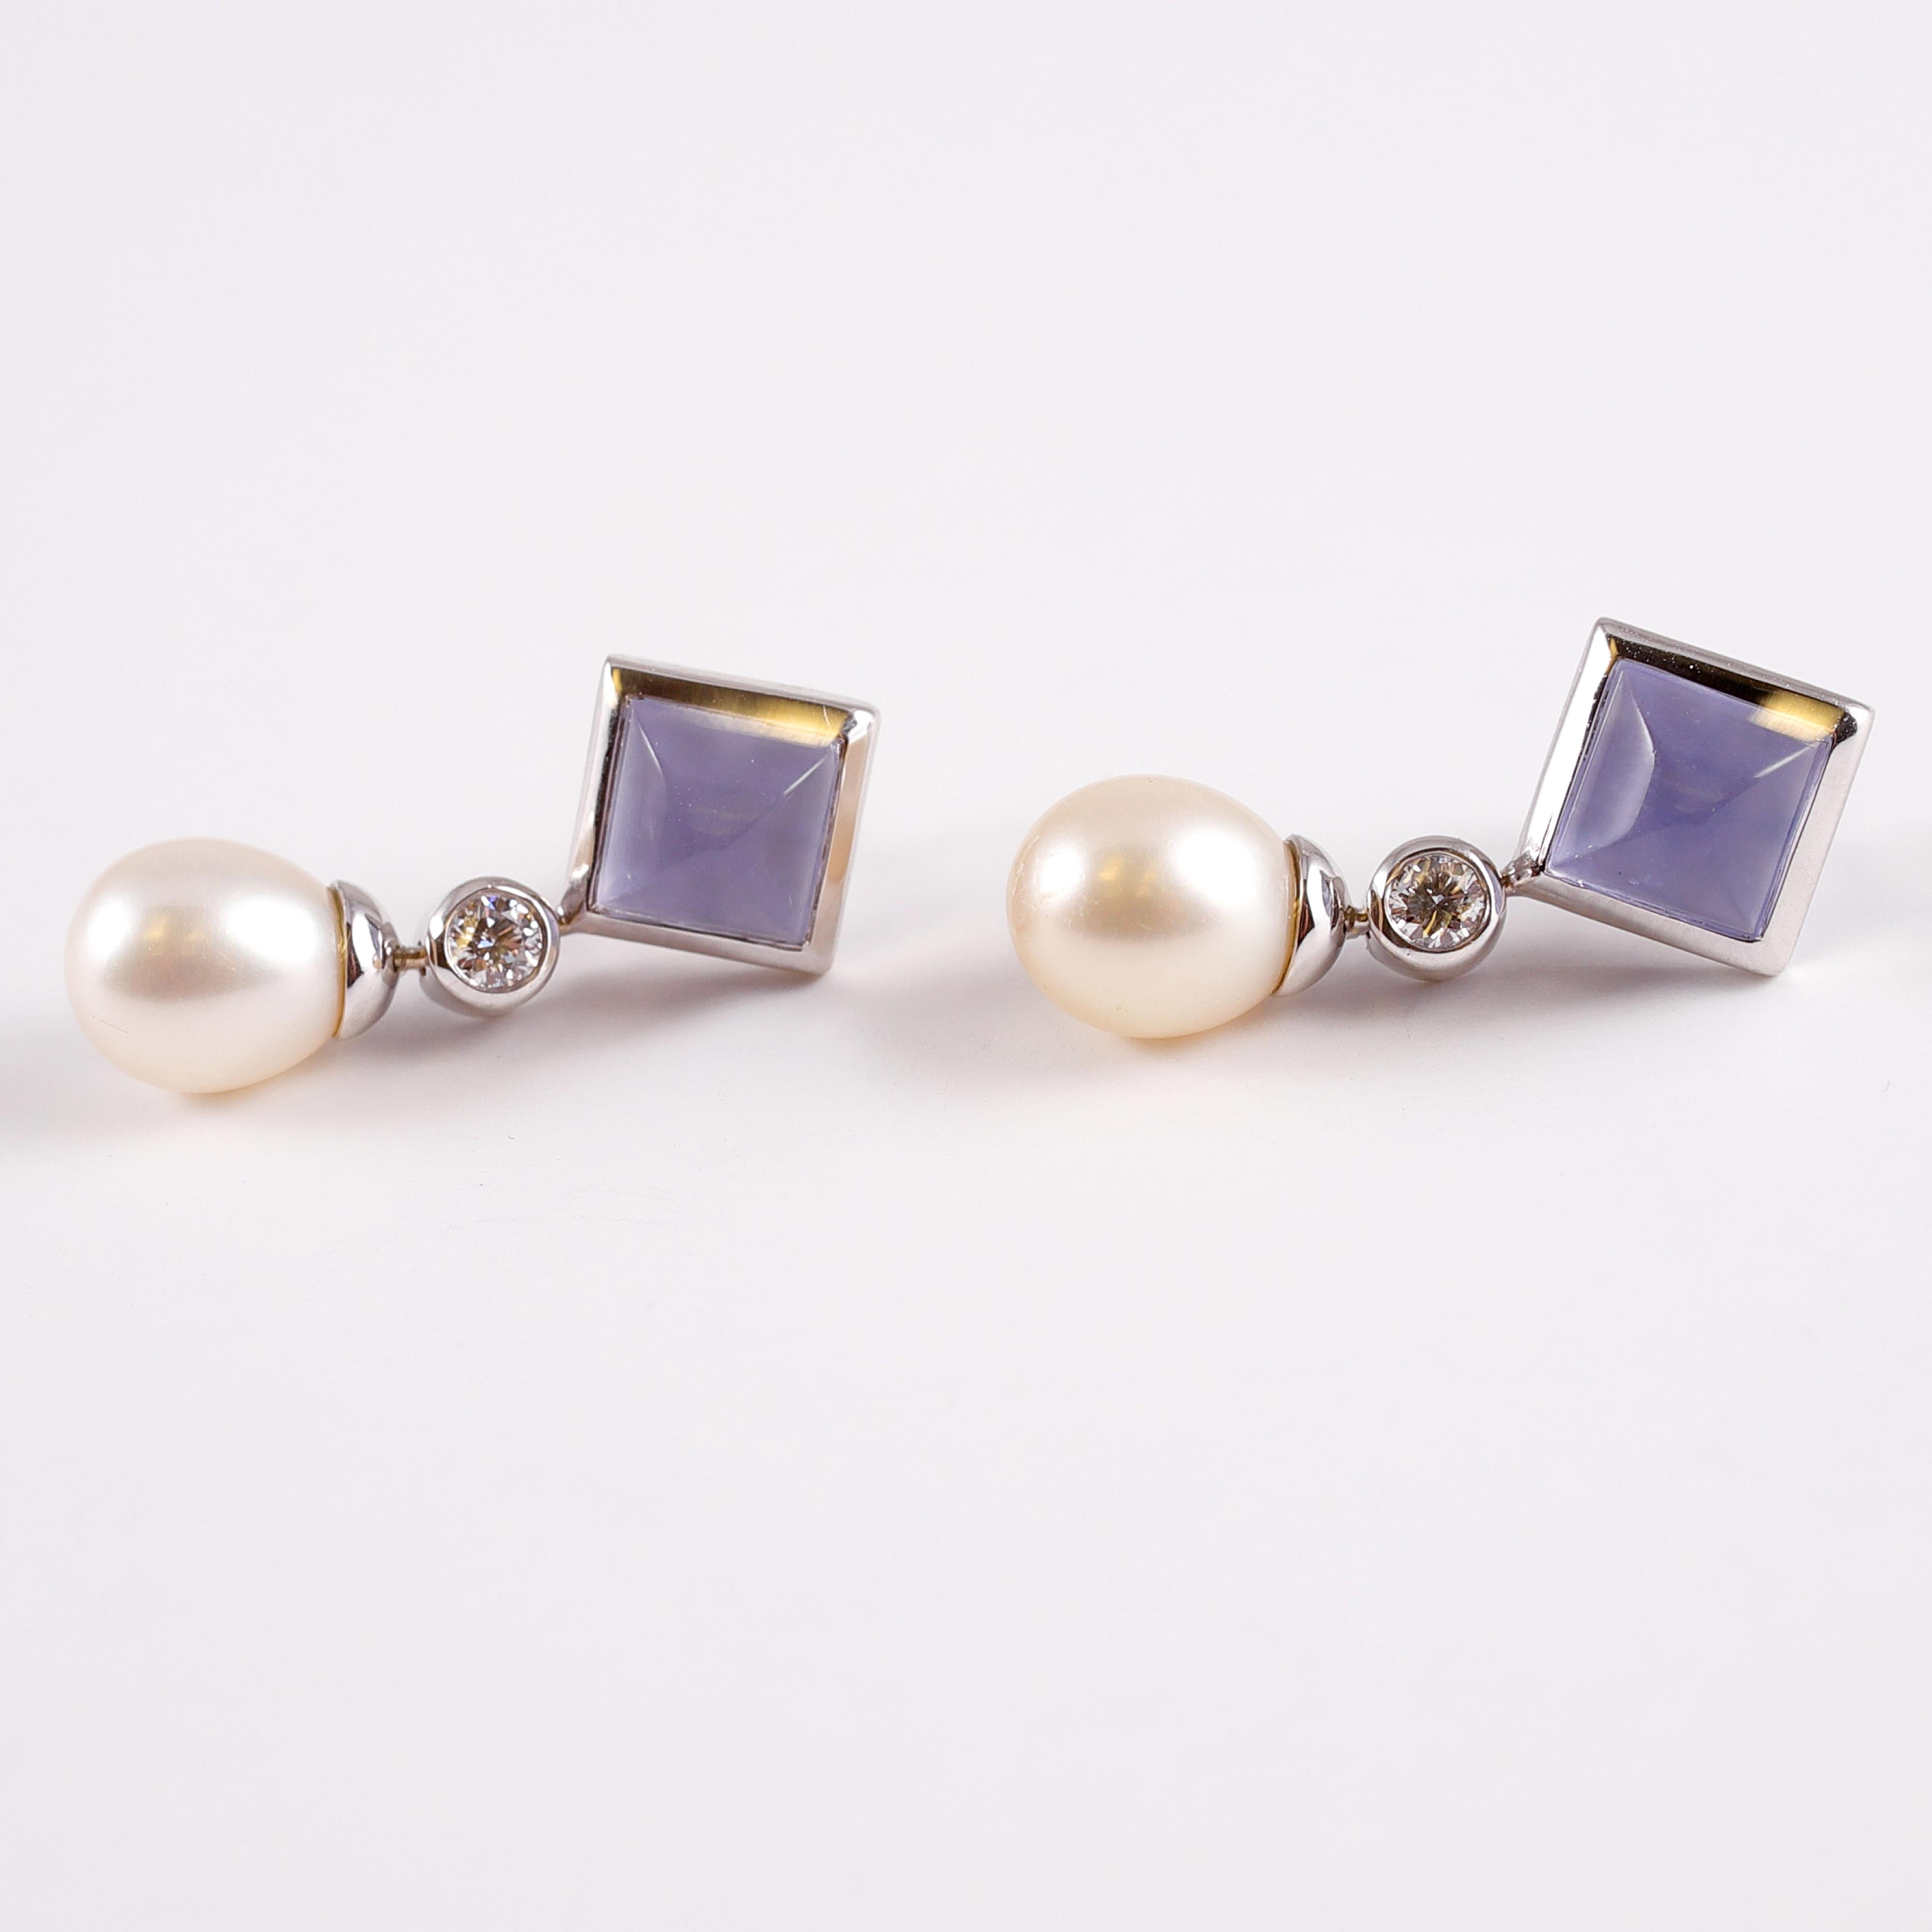 Bezel set square sugar-loaf chalcedony cabochons with cultured freshwater pearl drops and bezel set accent diamond  earrings.  The chalcedony stones and the bezels measure approximately 7.95 mm and the pearls measure approximately 7.10 mm in width x